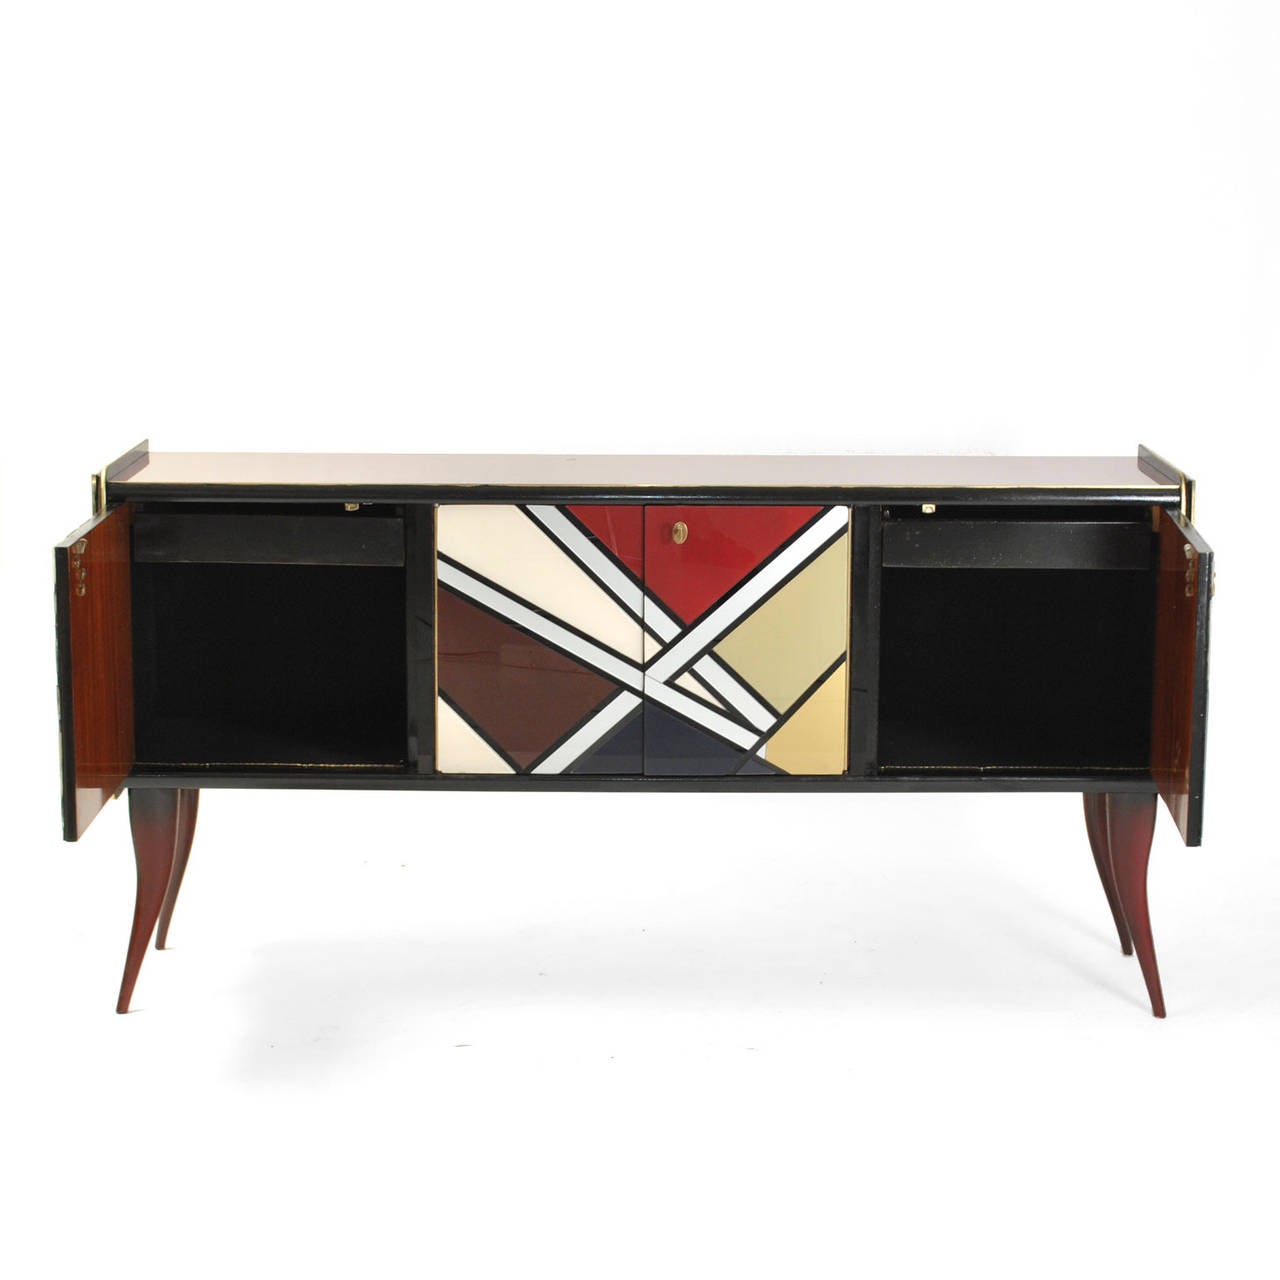 Sideboard composed by four doors whit central shelve and drawers at interior. MAde in solid wood covered in Murano glass in geometrical pattern with details in brass.